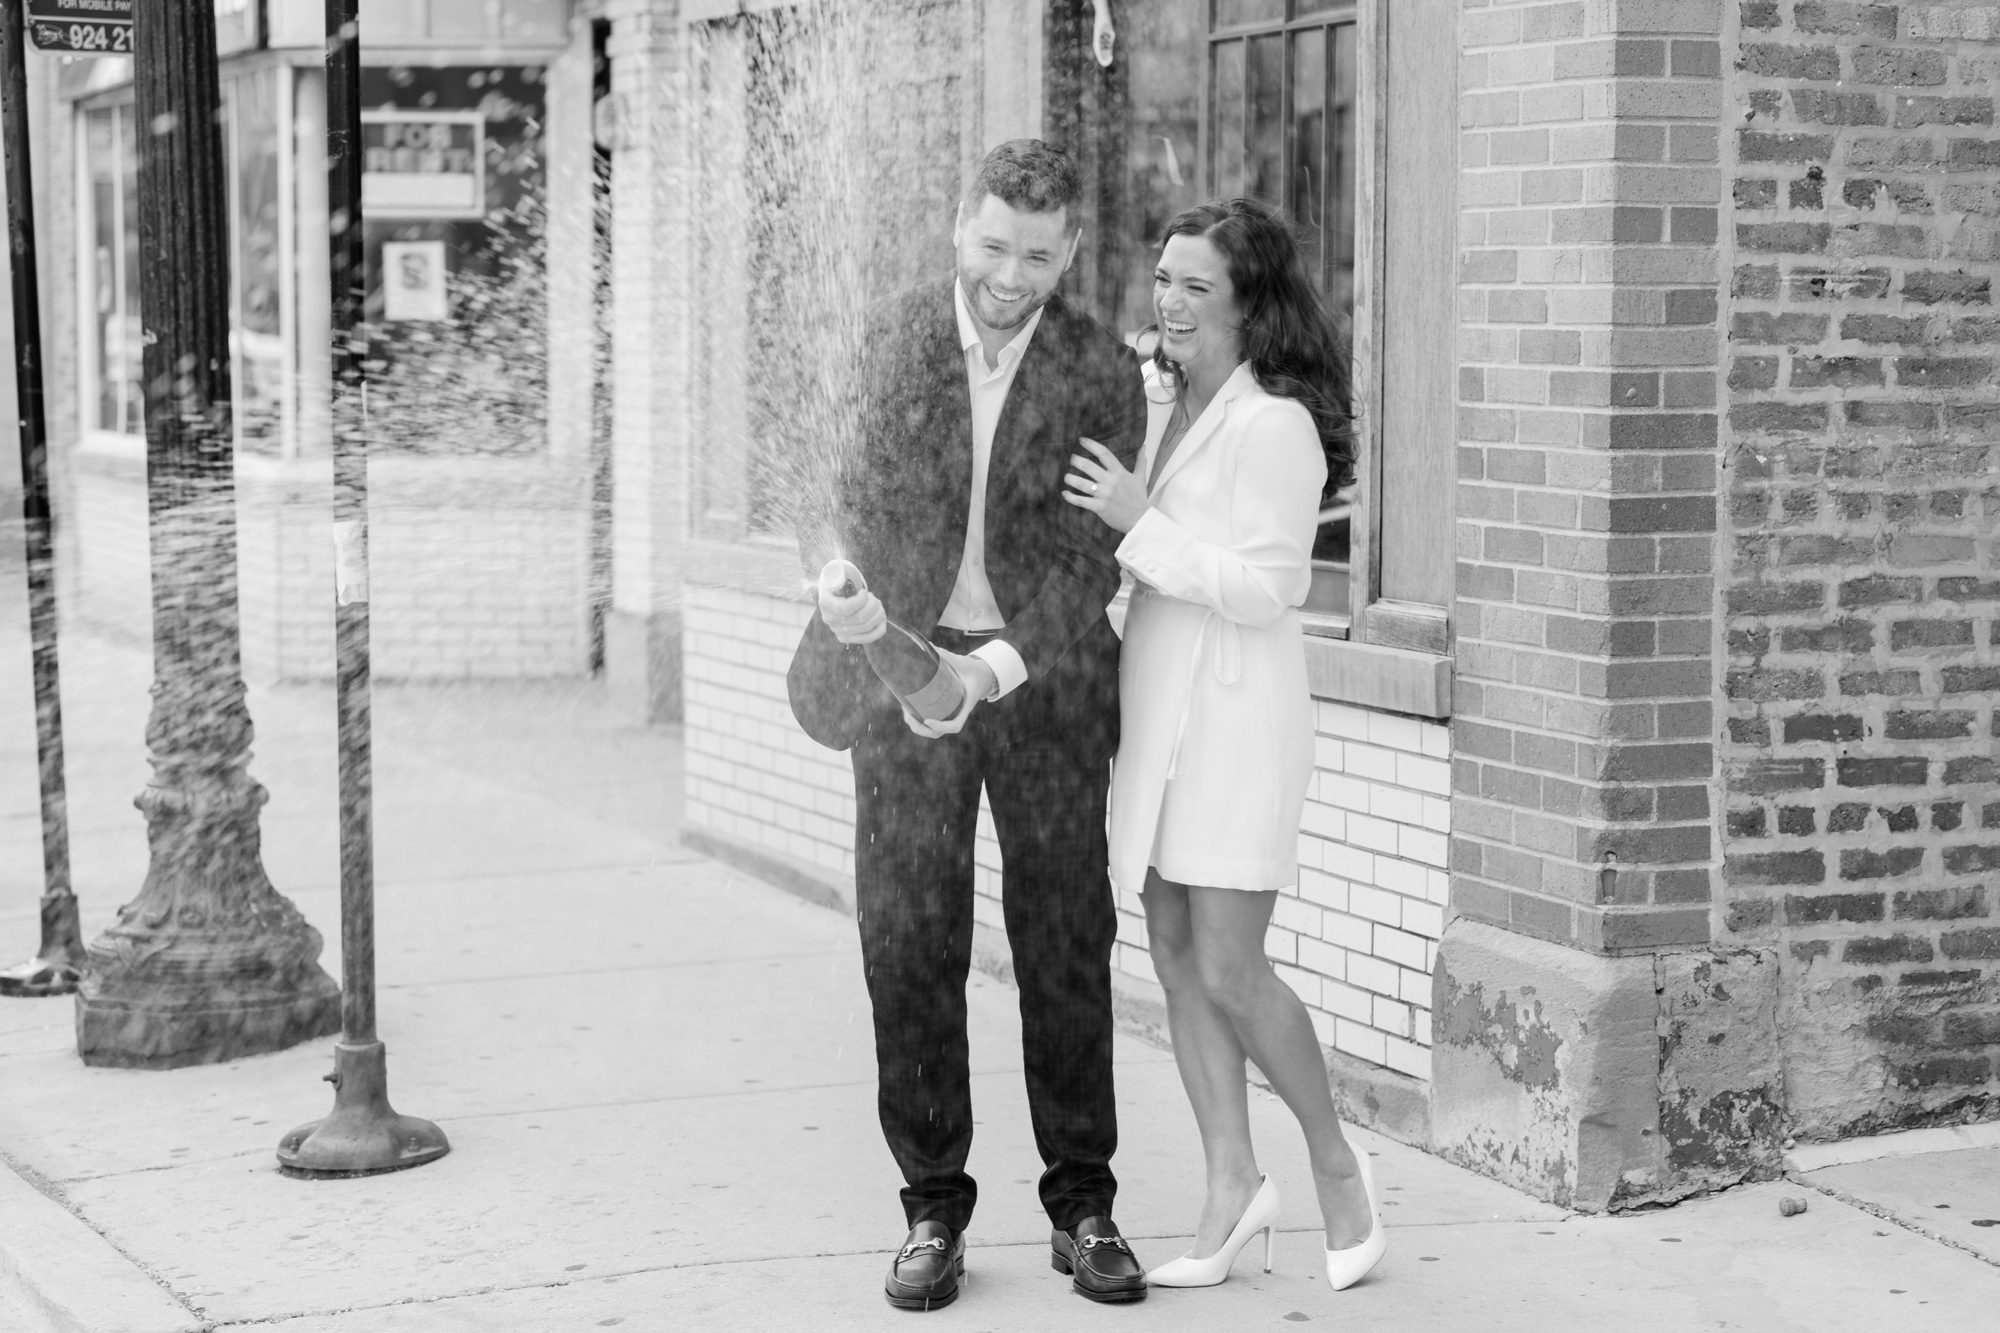 the couple spayed champagne during their Chicago engagement photos